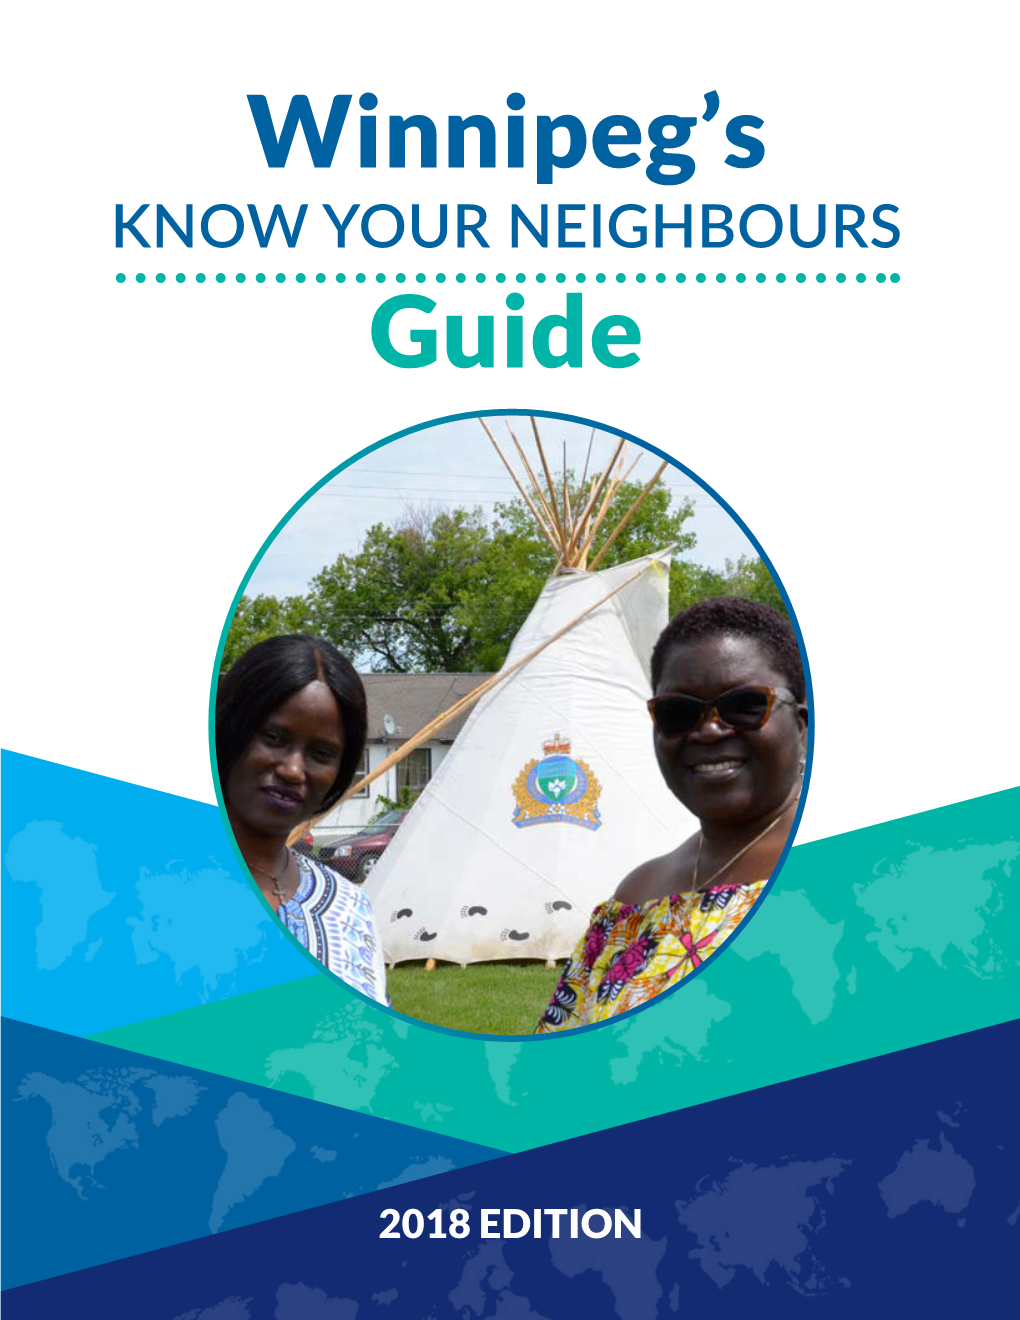 Winnipeg's Know Your Neighbours Guide 2018